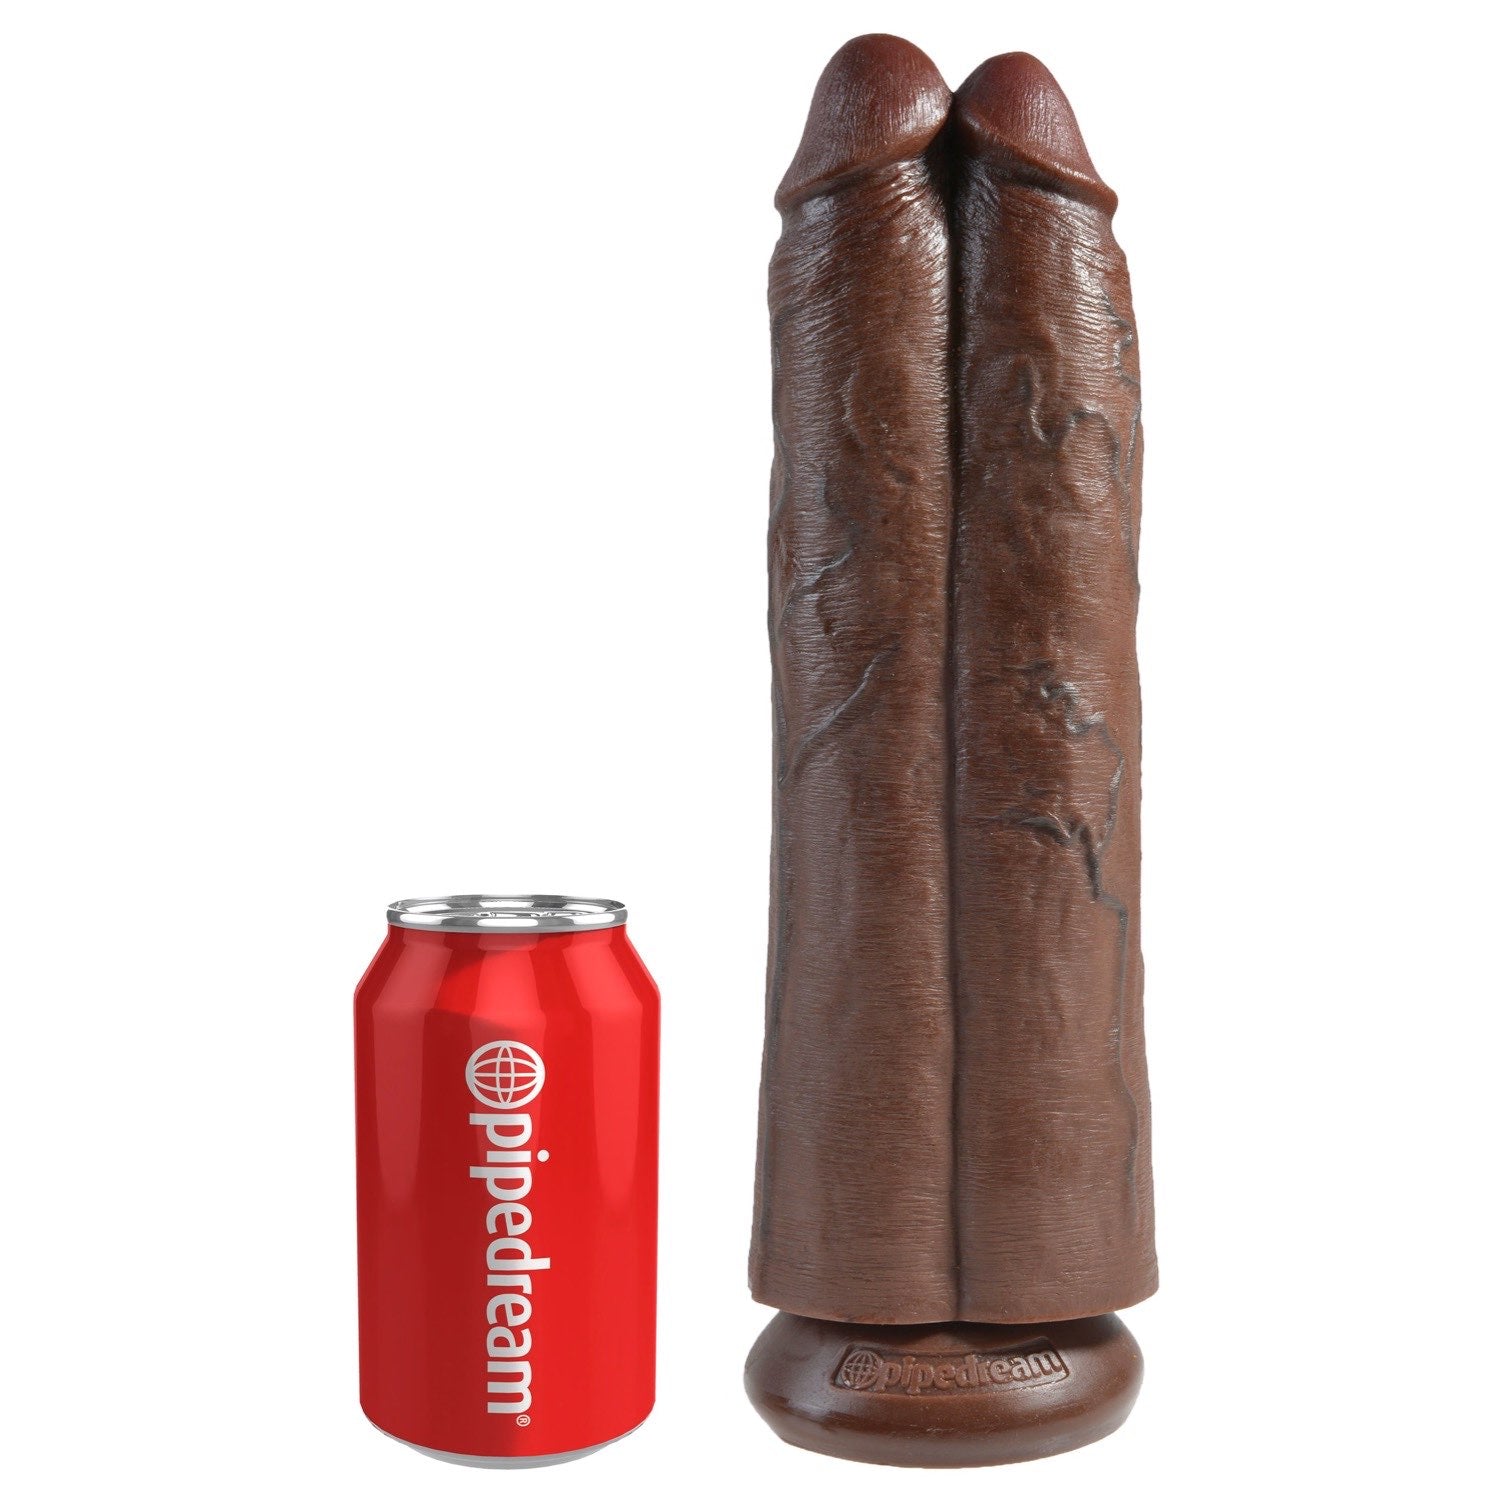 King Cock 11In 2 Cocks 1 Hole - Brown by Pipedream